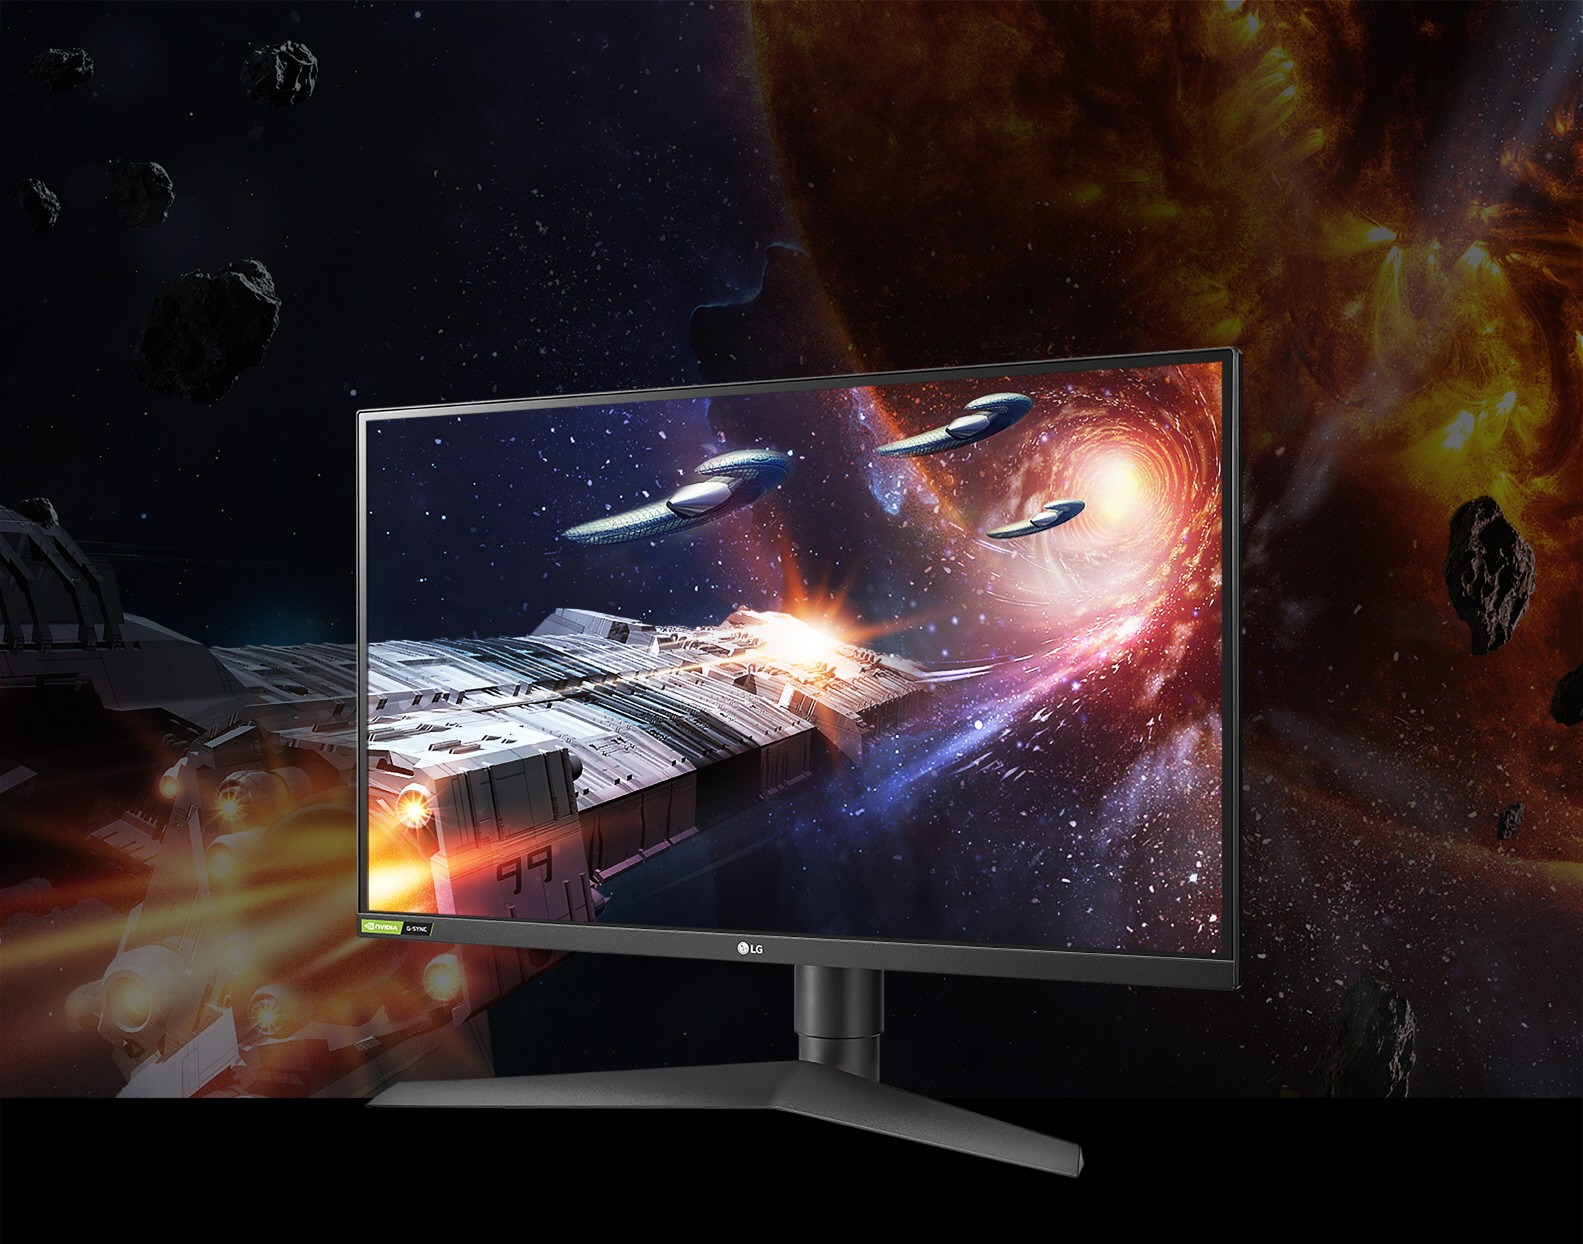 A right-side view of the LG UltraGear Monitor model 27GN750 displaying lifelike images of space with rich colors in a dark setting.